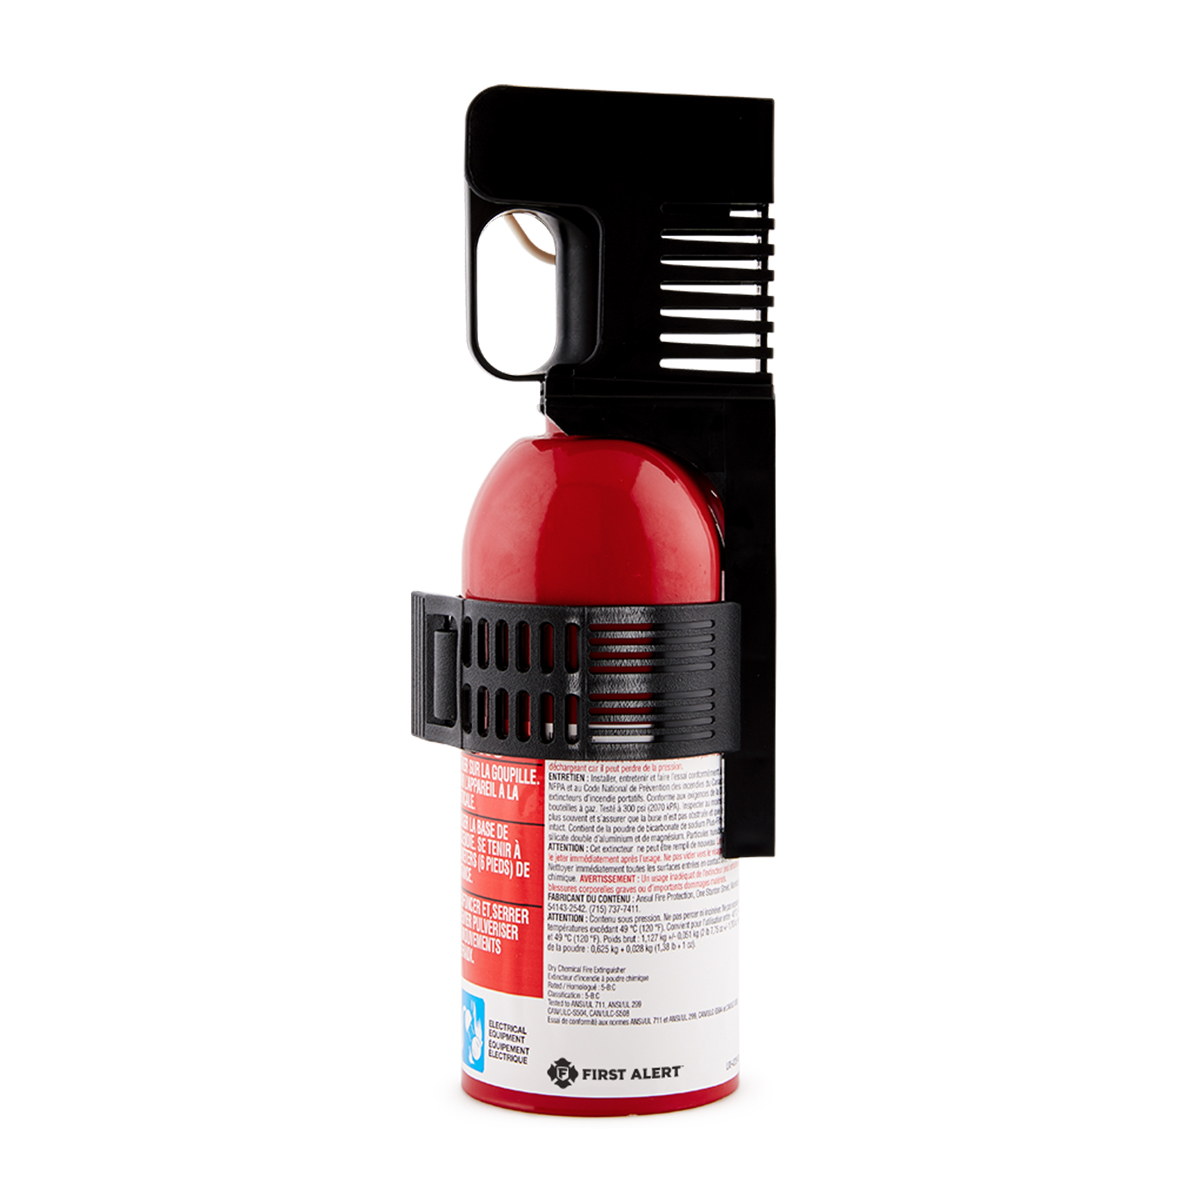 First Alert AUTO5 Car Fire Extinguisher UL rated 5-B:C, Red - image 1 of 6